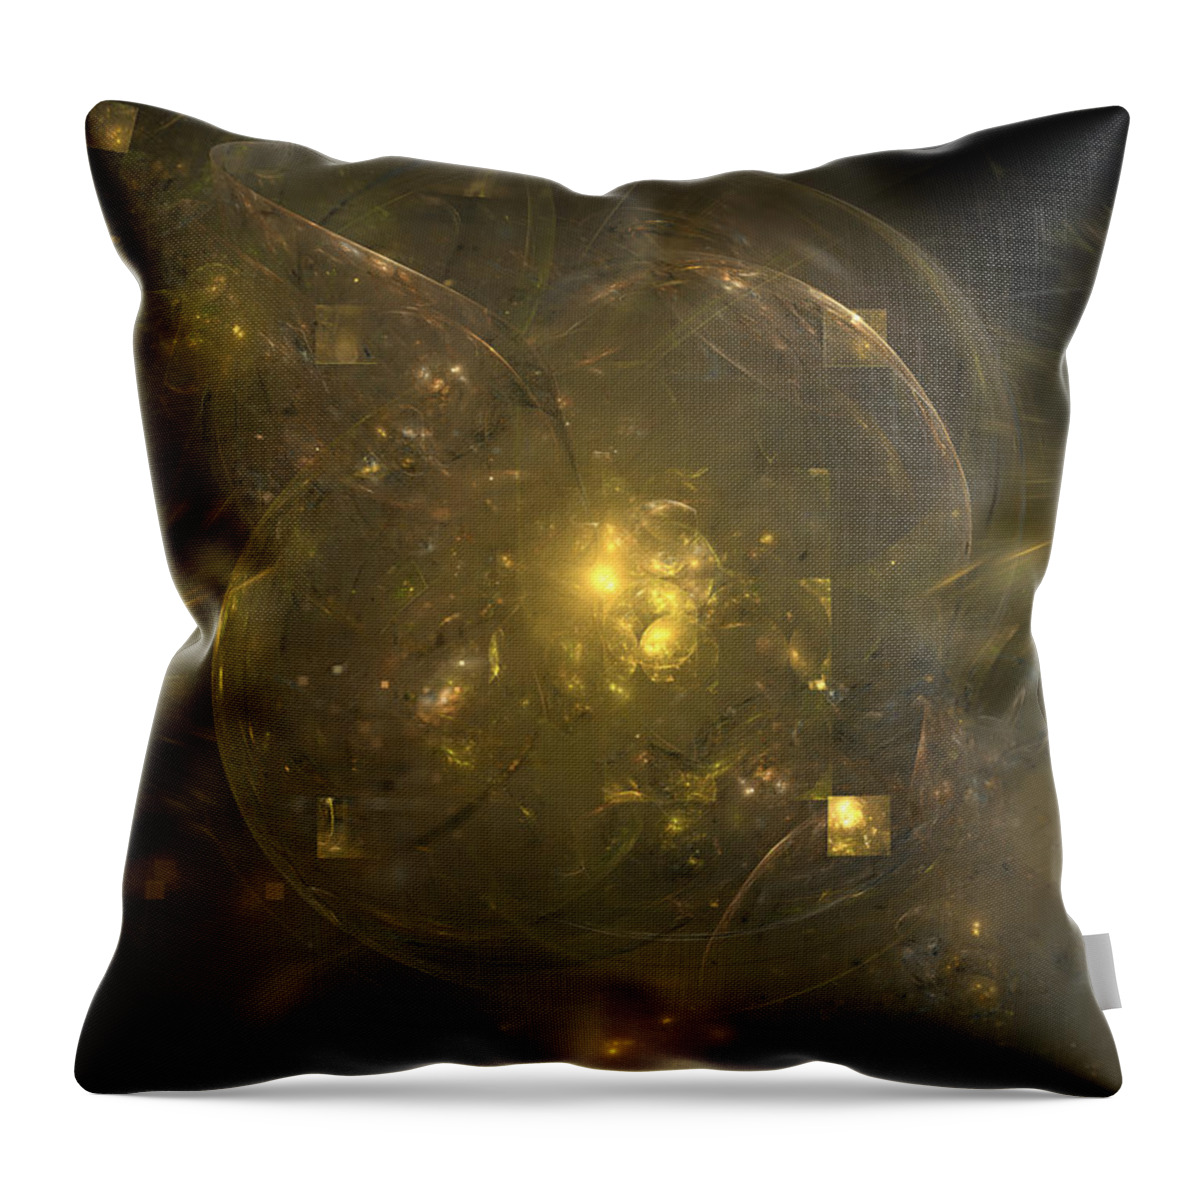 Art Throw Pillow featuring the digital art No One Knows by Jeff Iverson